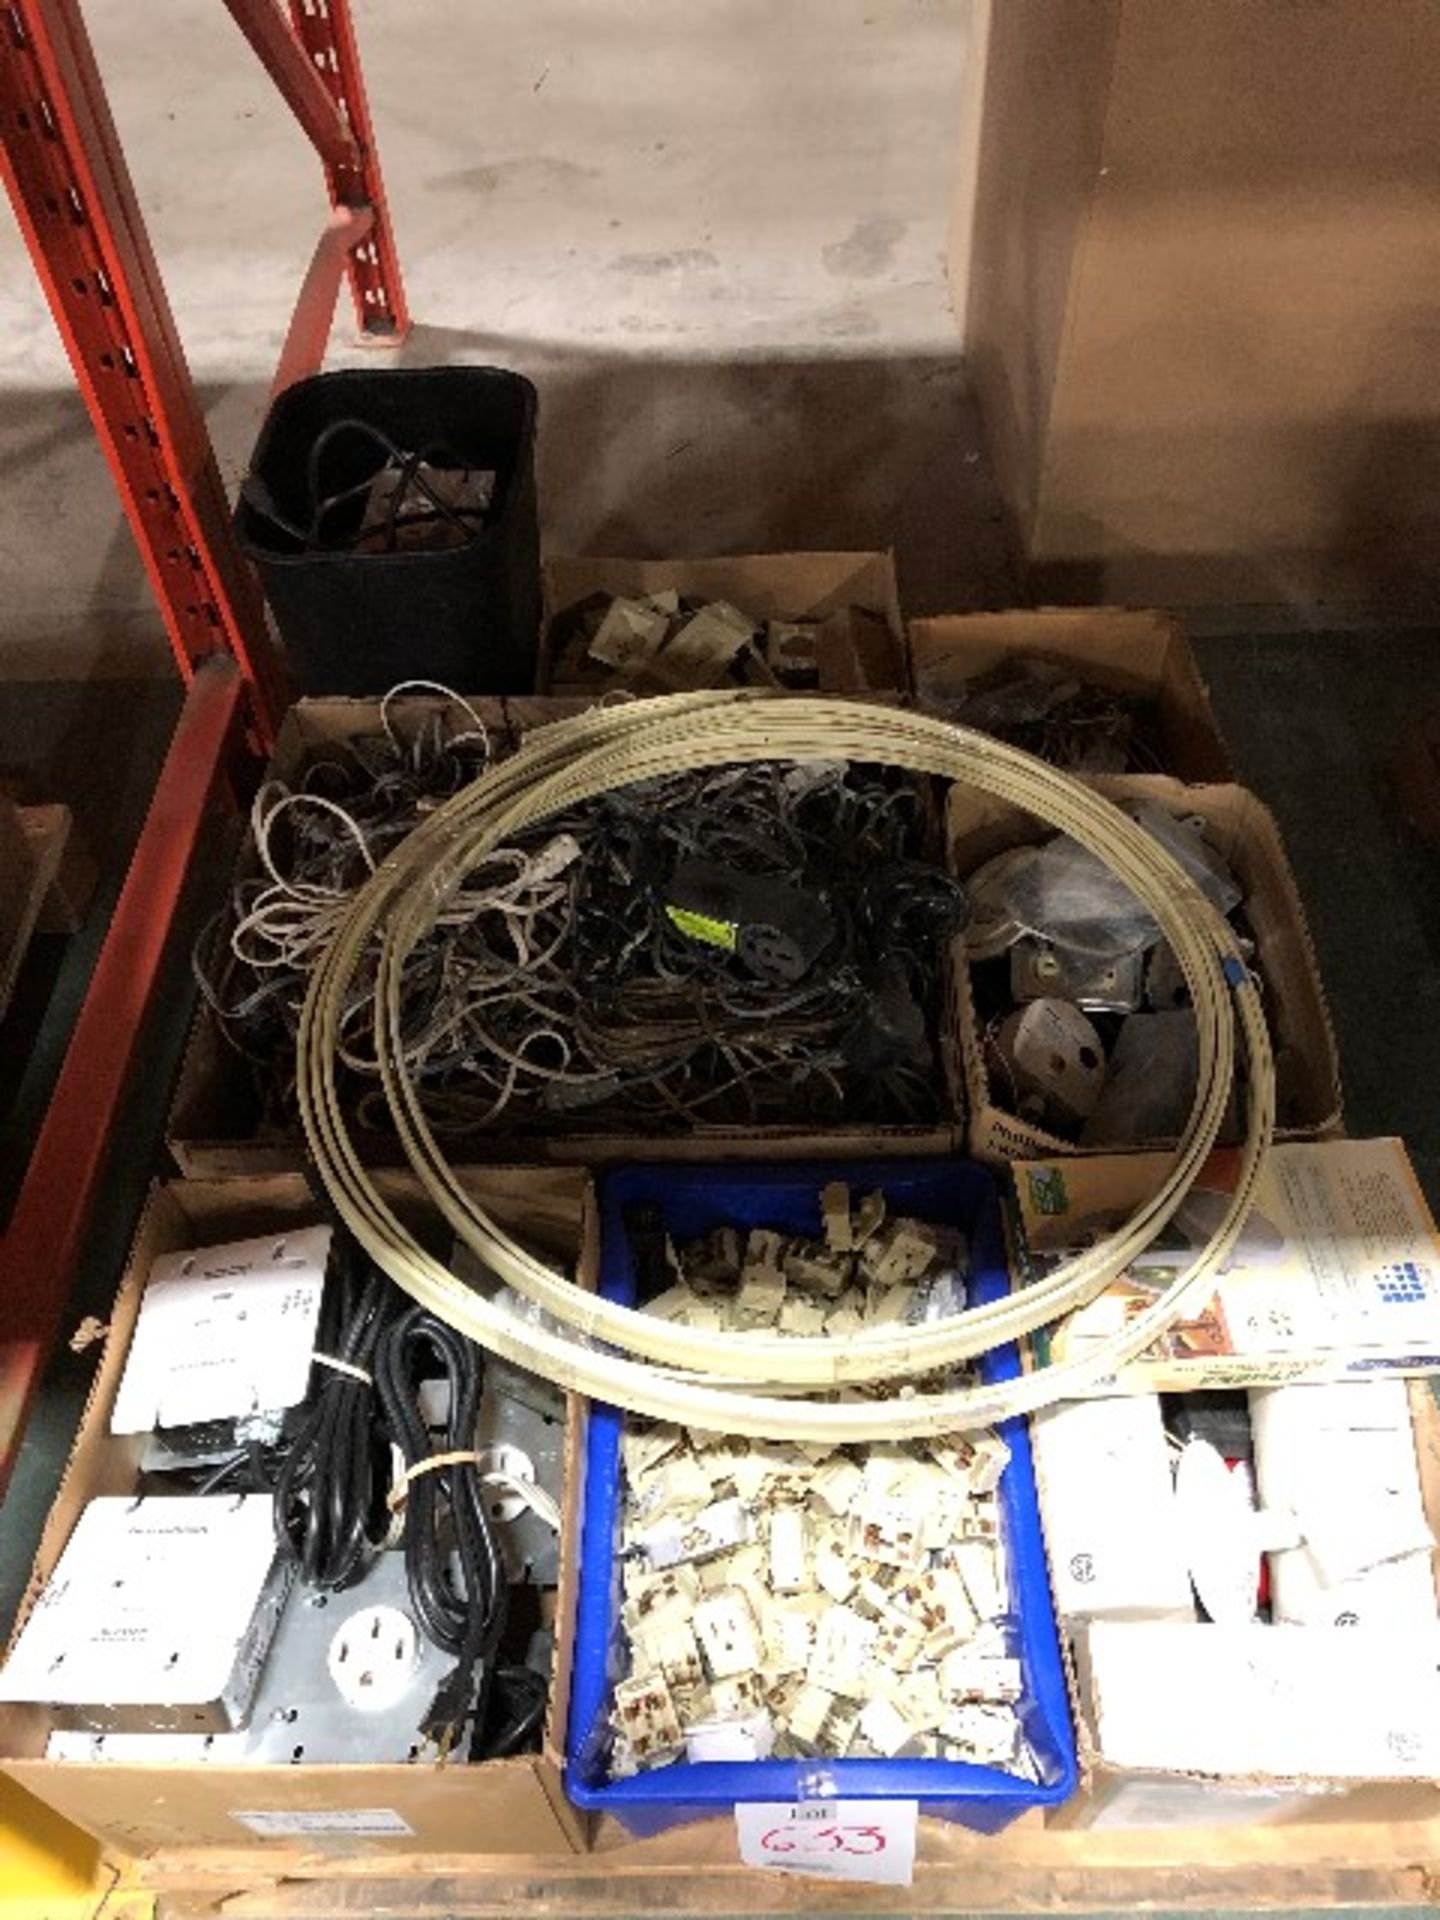 LOT: Assorted wires, lights, outlets, etc..., 7boxes